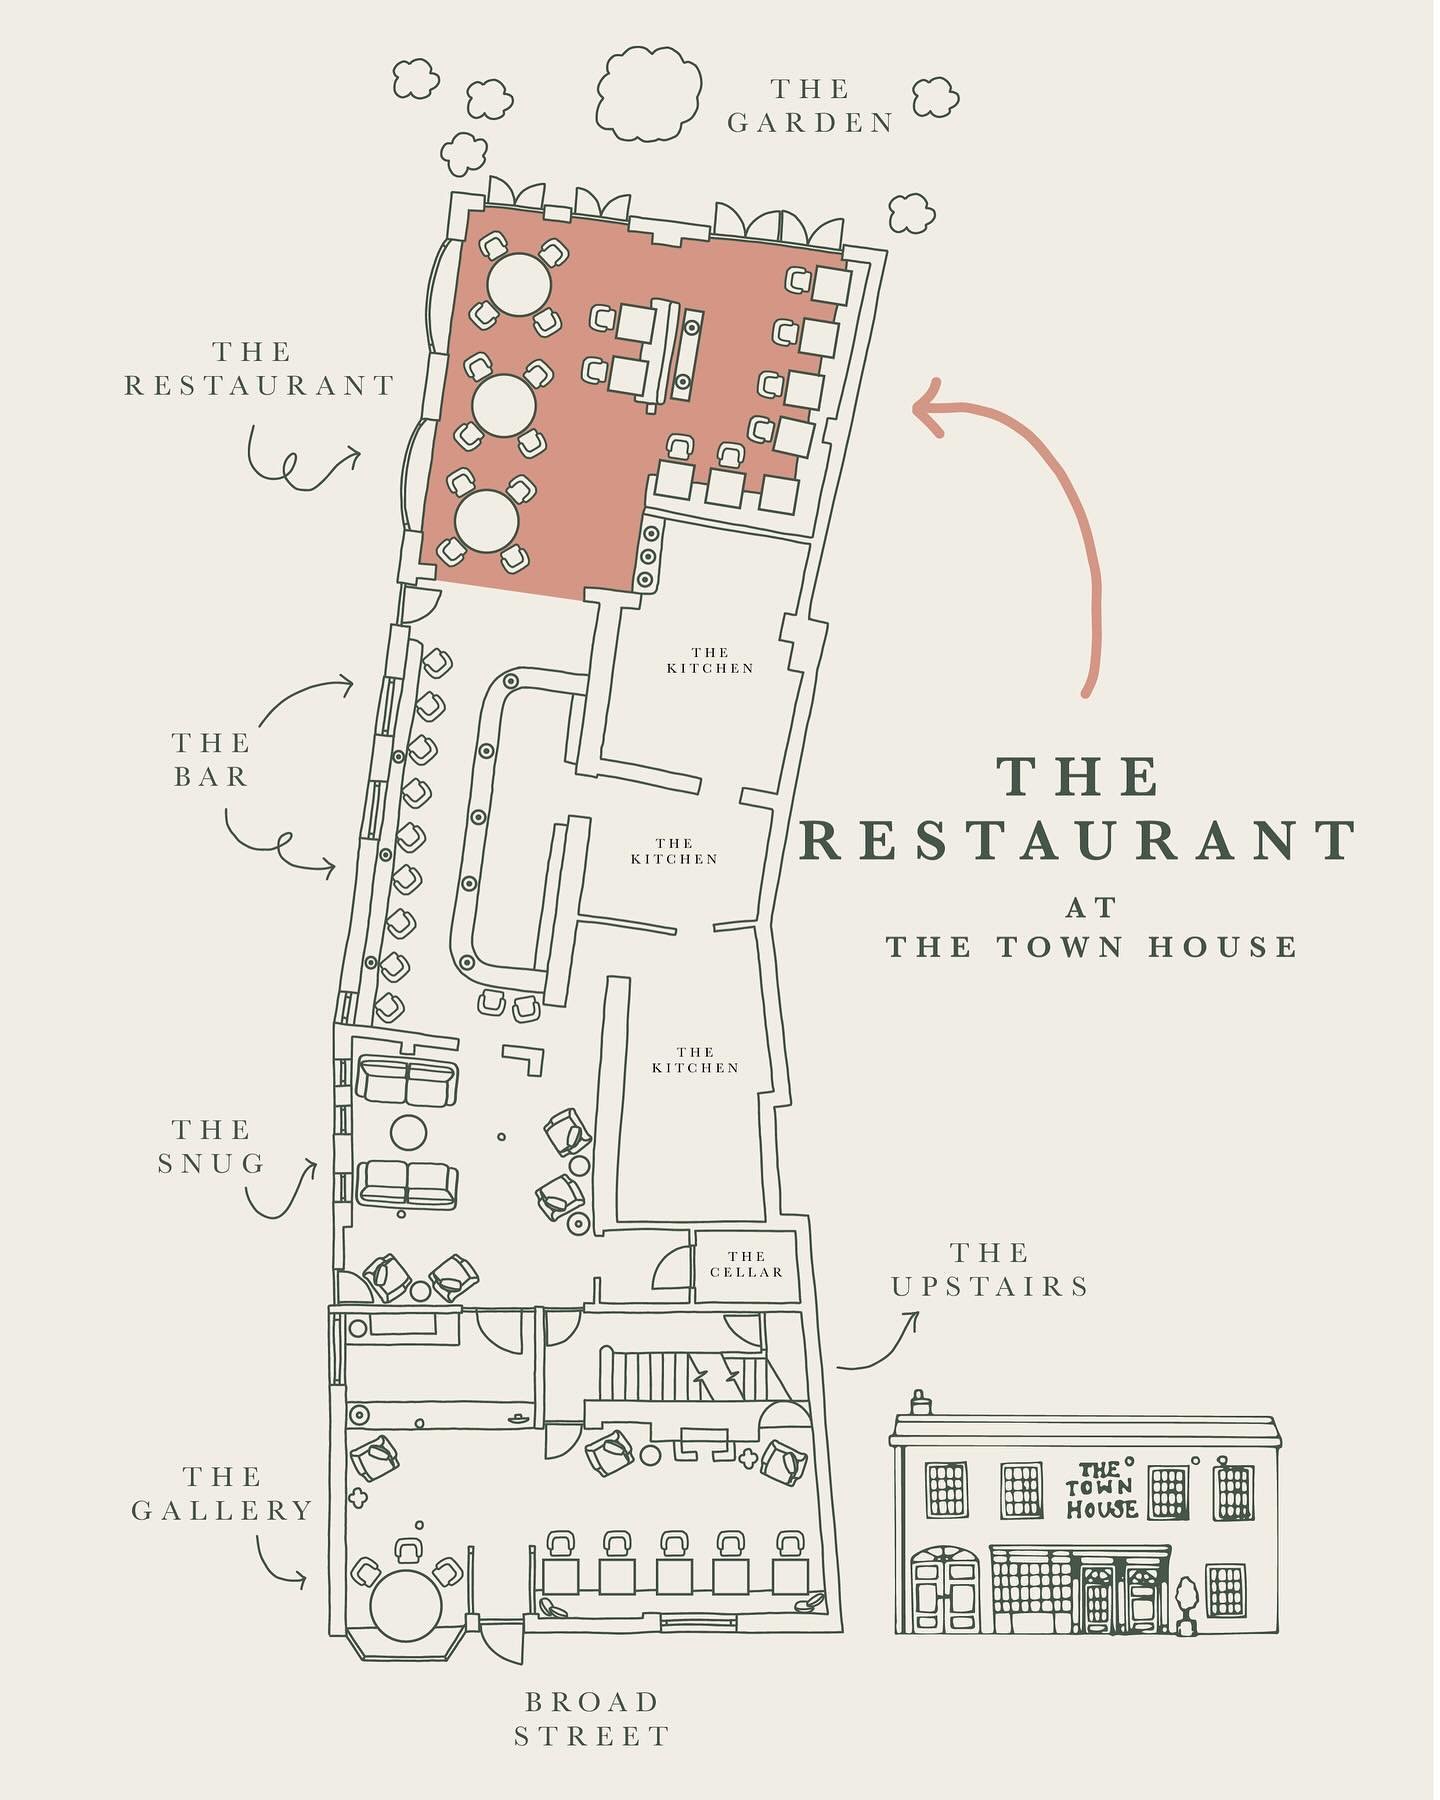 The Restaurant 🤍

Located at the back of our house, with doors that open out into our garden. SO much natural light &amp; designed with comfort in mind 🐩

Serving: 
Breakfast 9:30-11am ☕️
Lunch 12pm-2:30pm 🍴
Supper 6pm-9pm 🍽️
&amp; Sunday Lunch 1